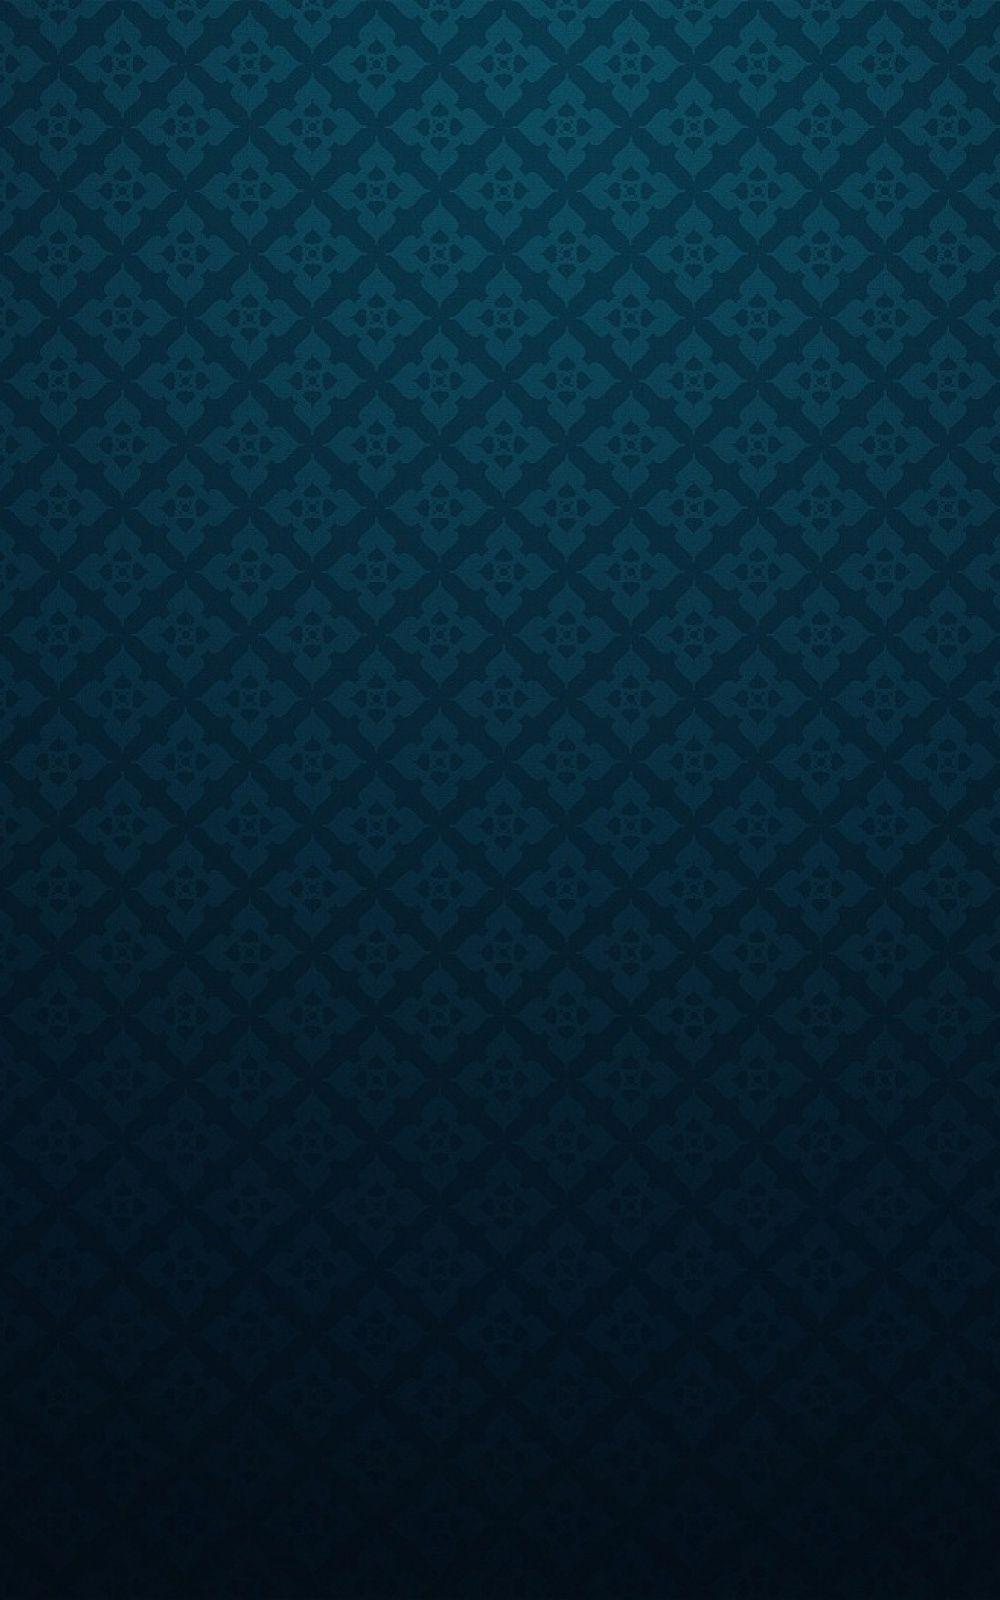 Blue Navy Pattern Android Wallpaper free download